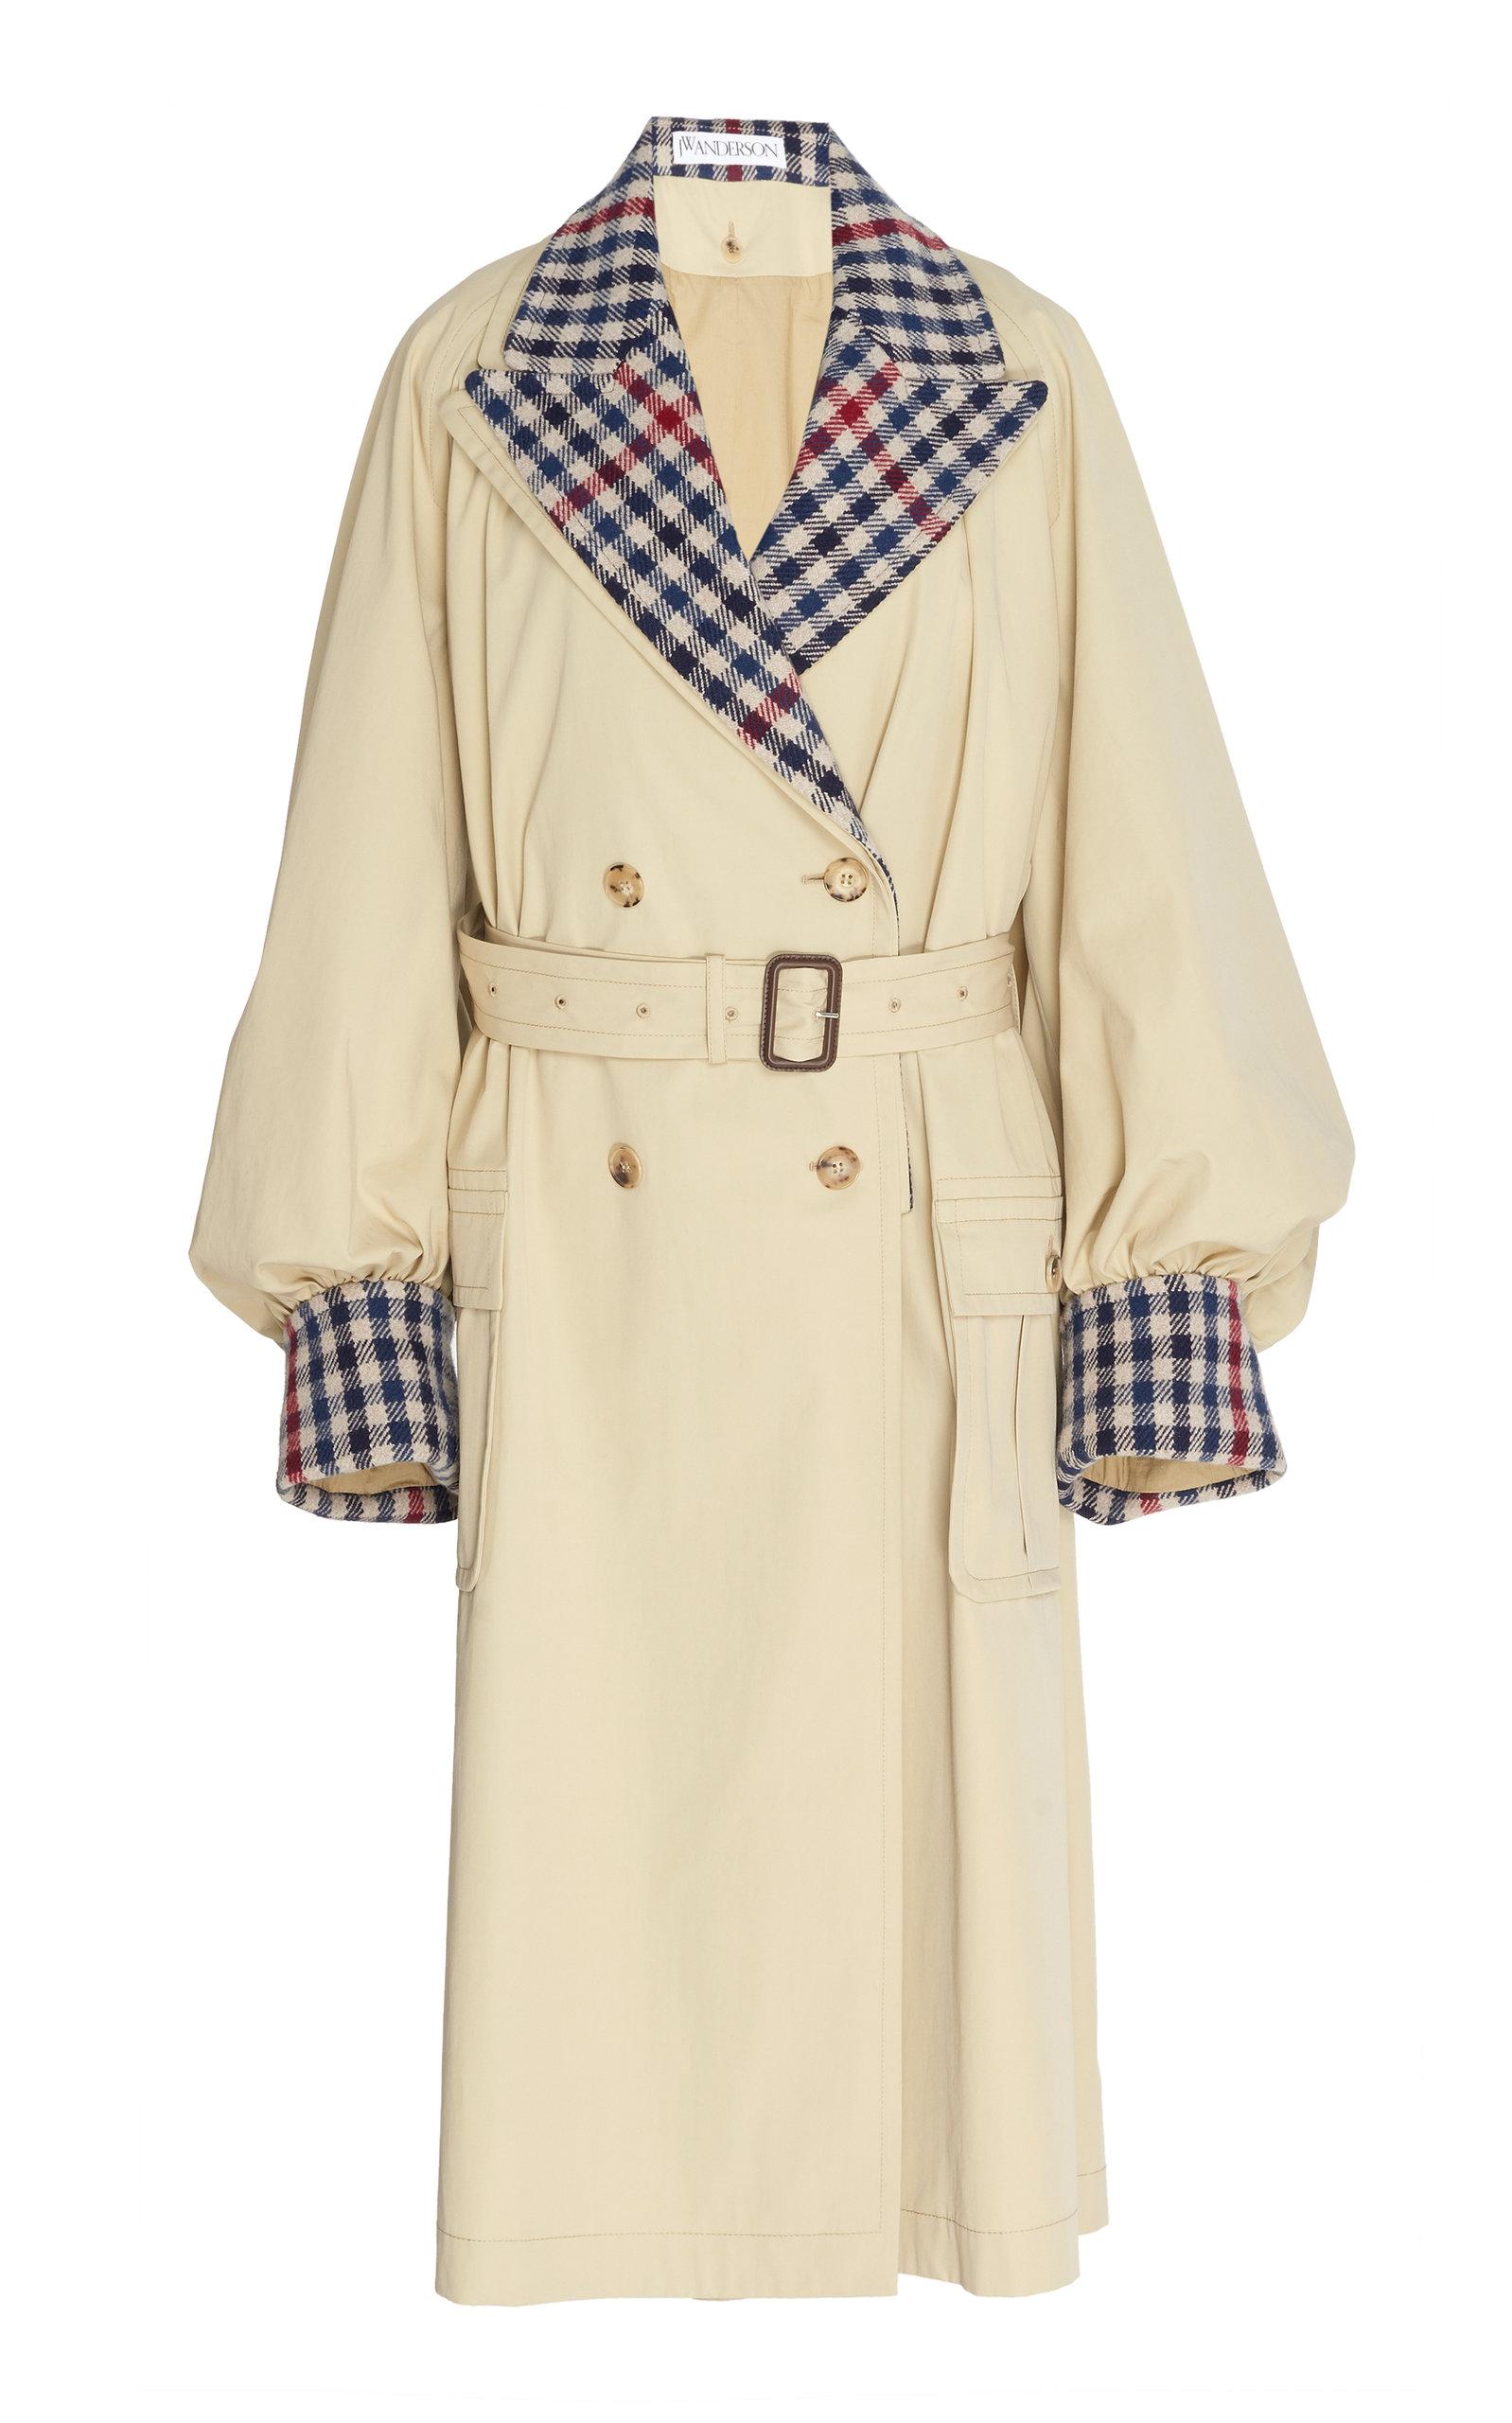 JW Anderson Plaid Contrast Cotton Trench Coat in Natural - Lyst